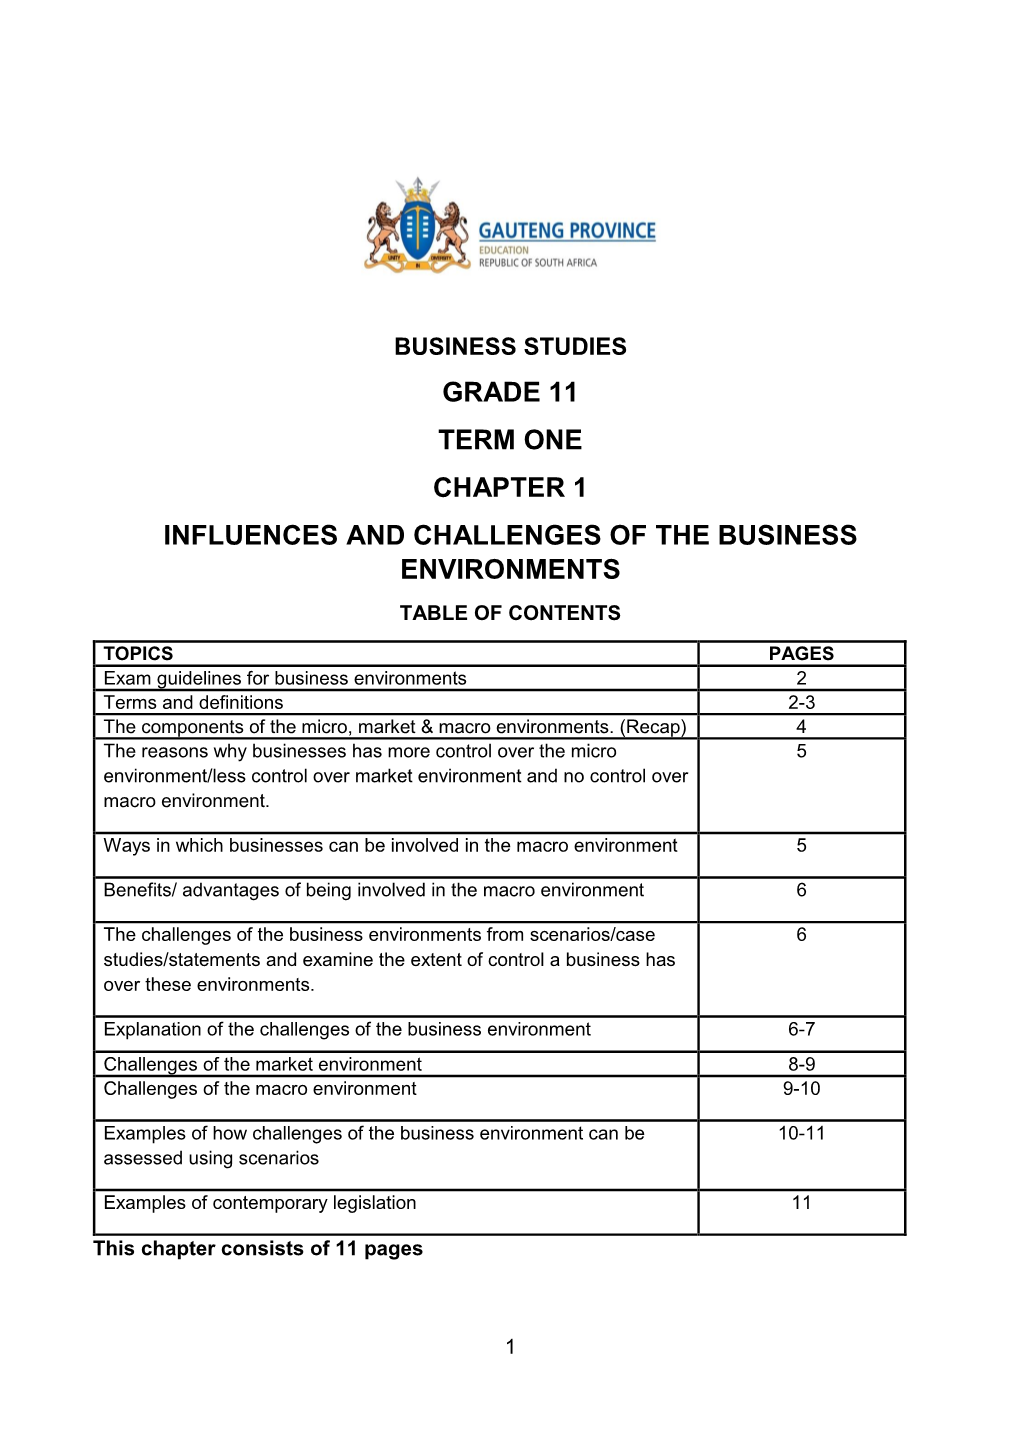 Business Studies Grade 11 Term One Chapter 1 Influences and Challenges of the Business Environments Table of Contents